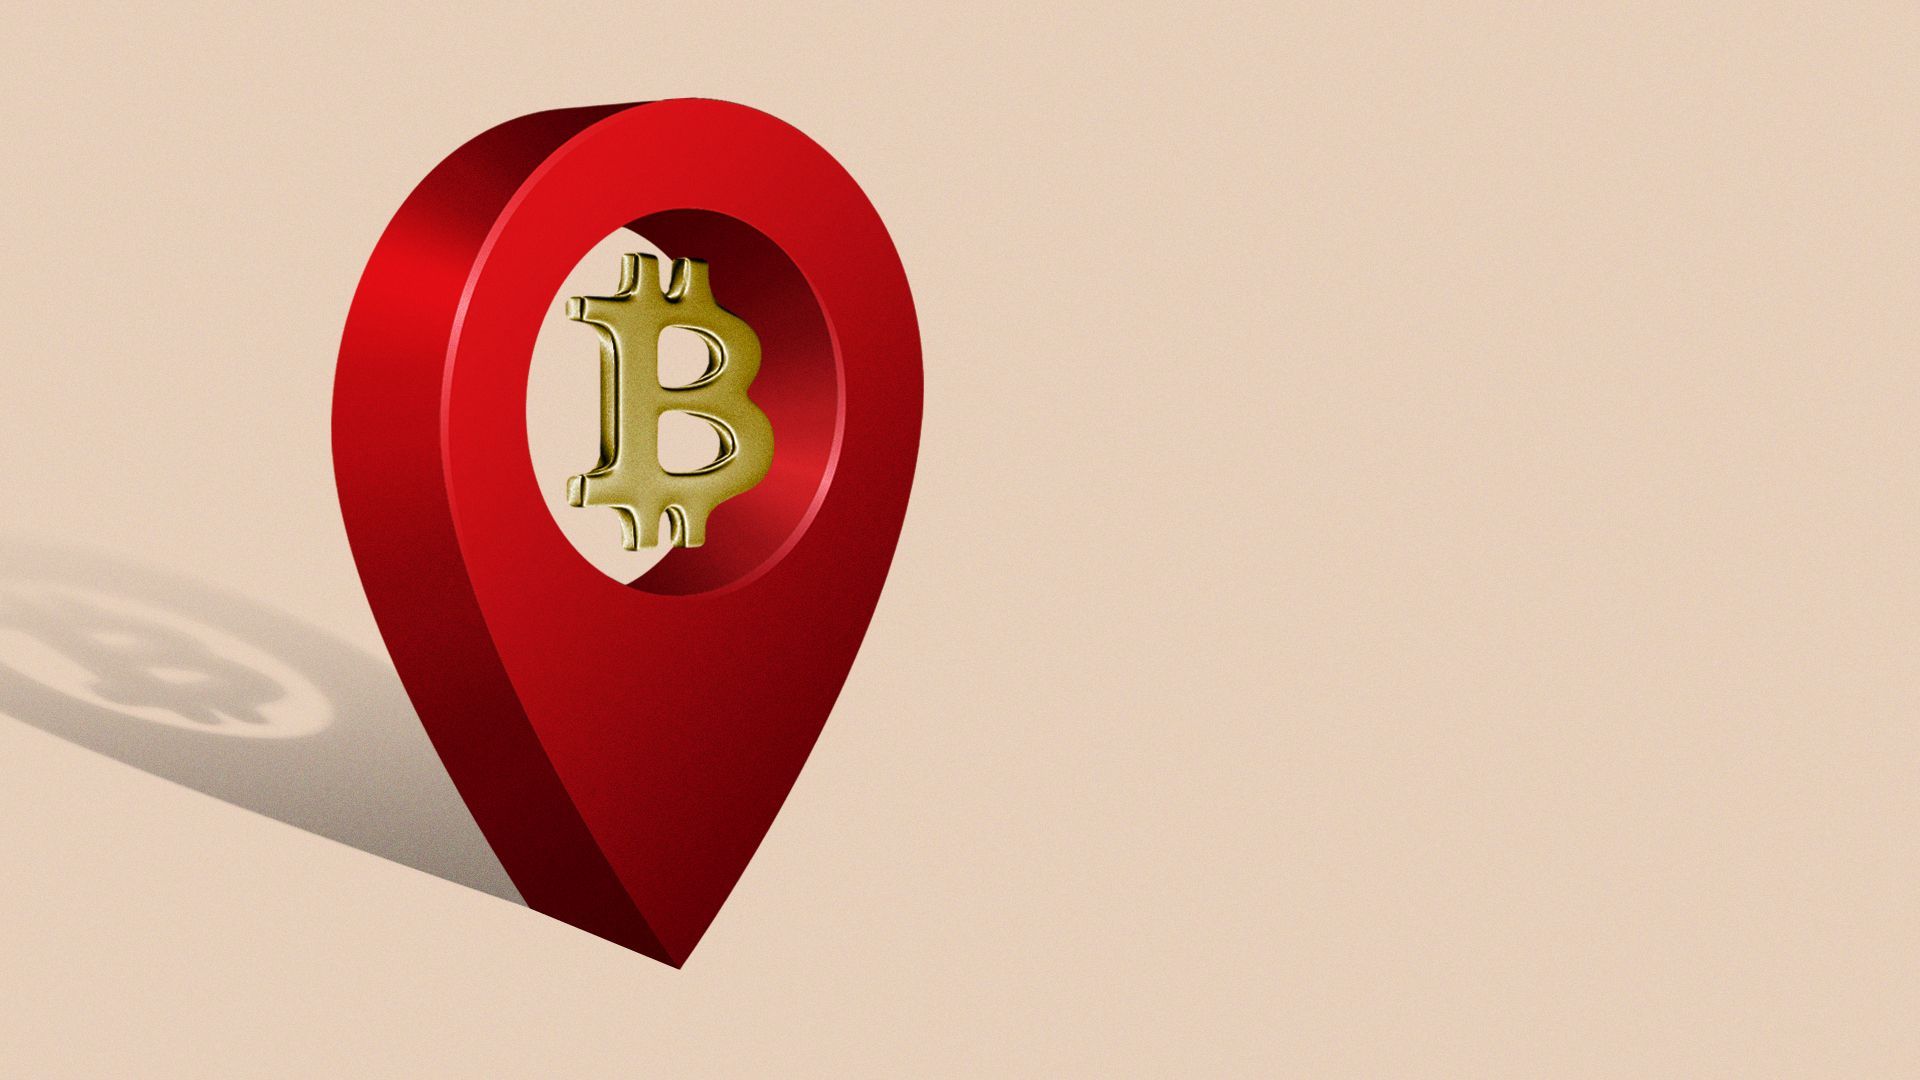 Illustration of the bitcoin logo inside a locater icon.